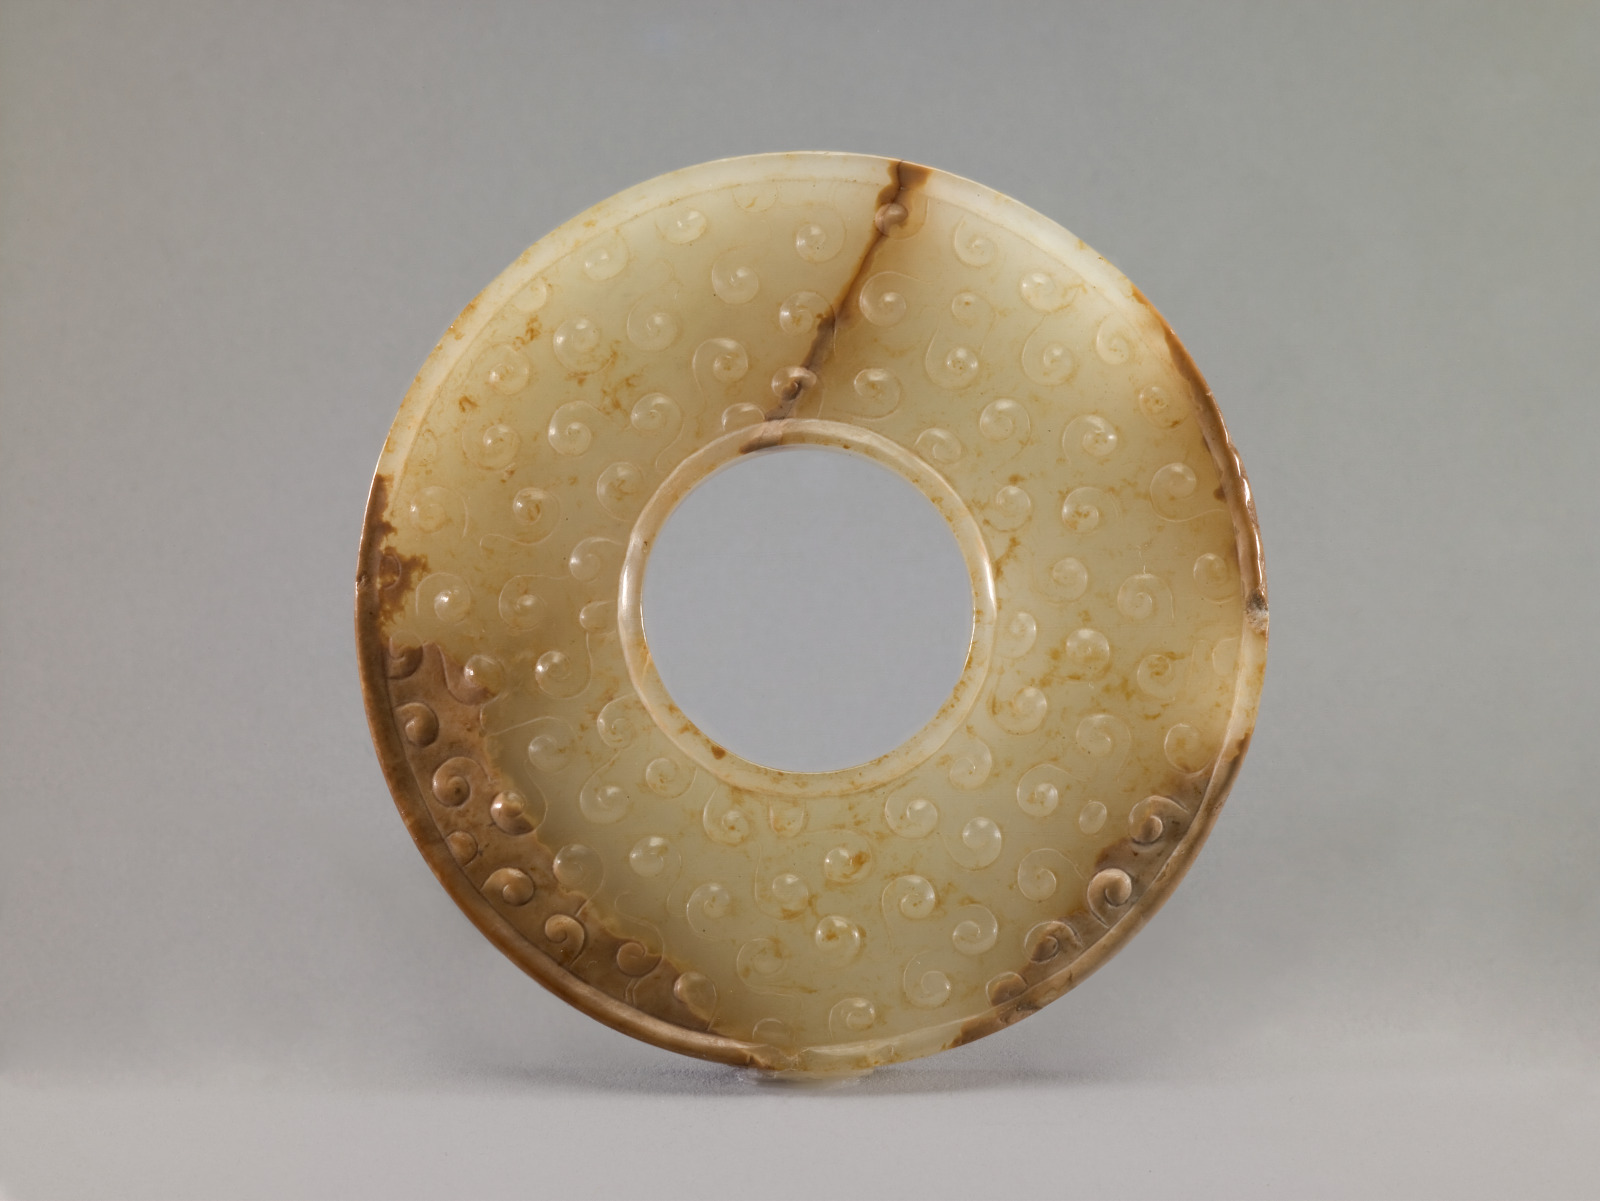 Ritual Object in the Form of an Annular Disk (bi) - Saint Louis Art Museum